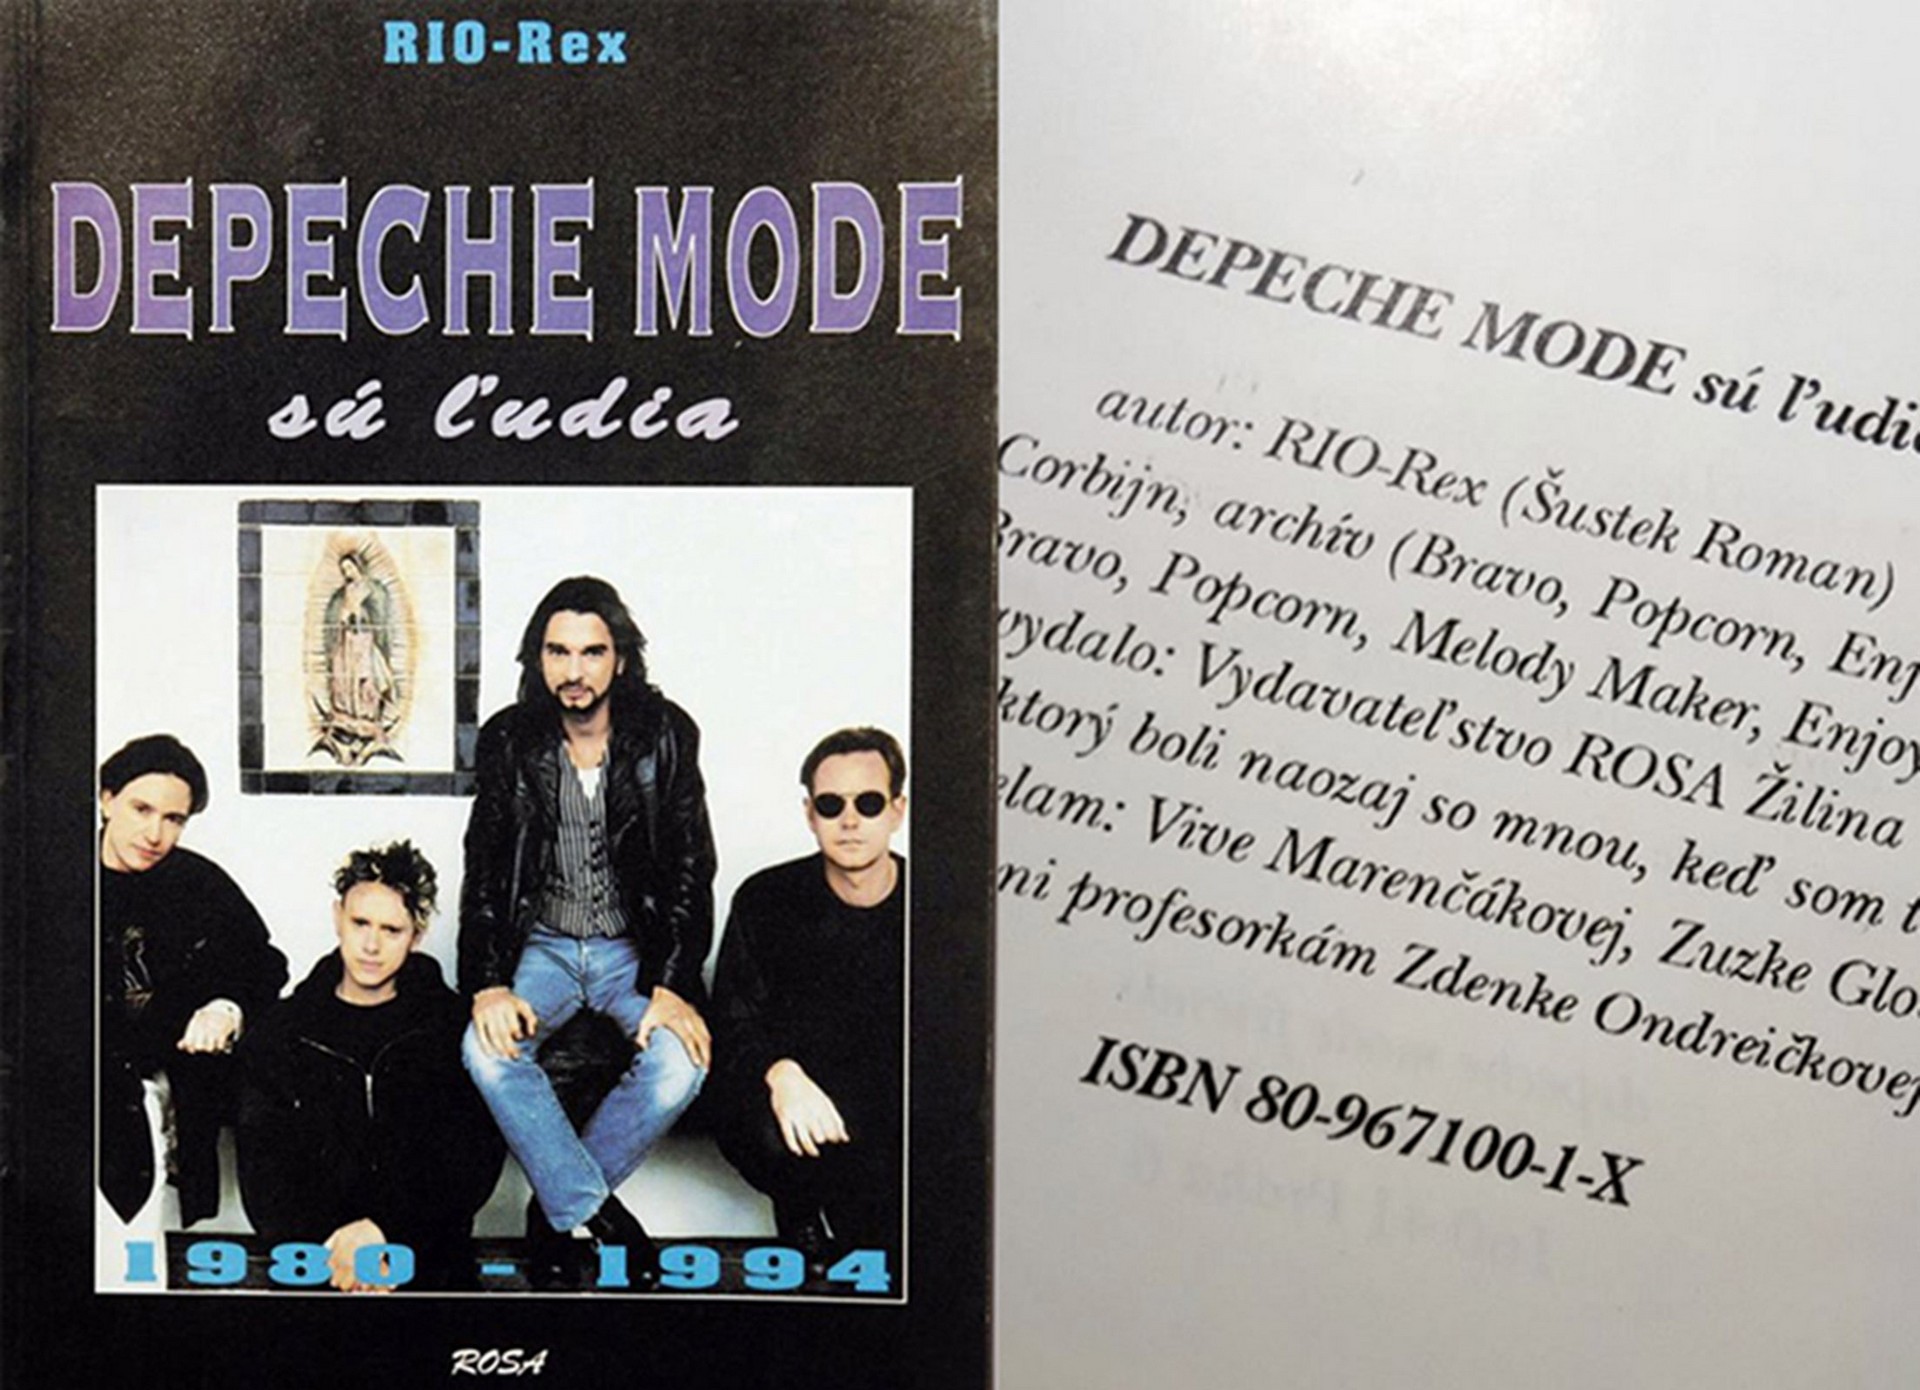 art_history_1994_depeche_mode_book_are_people